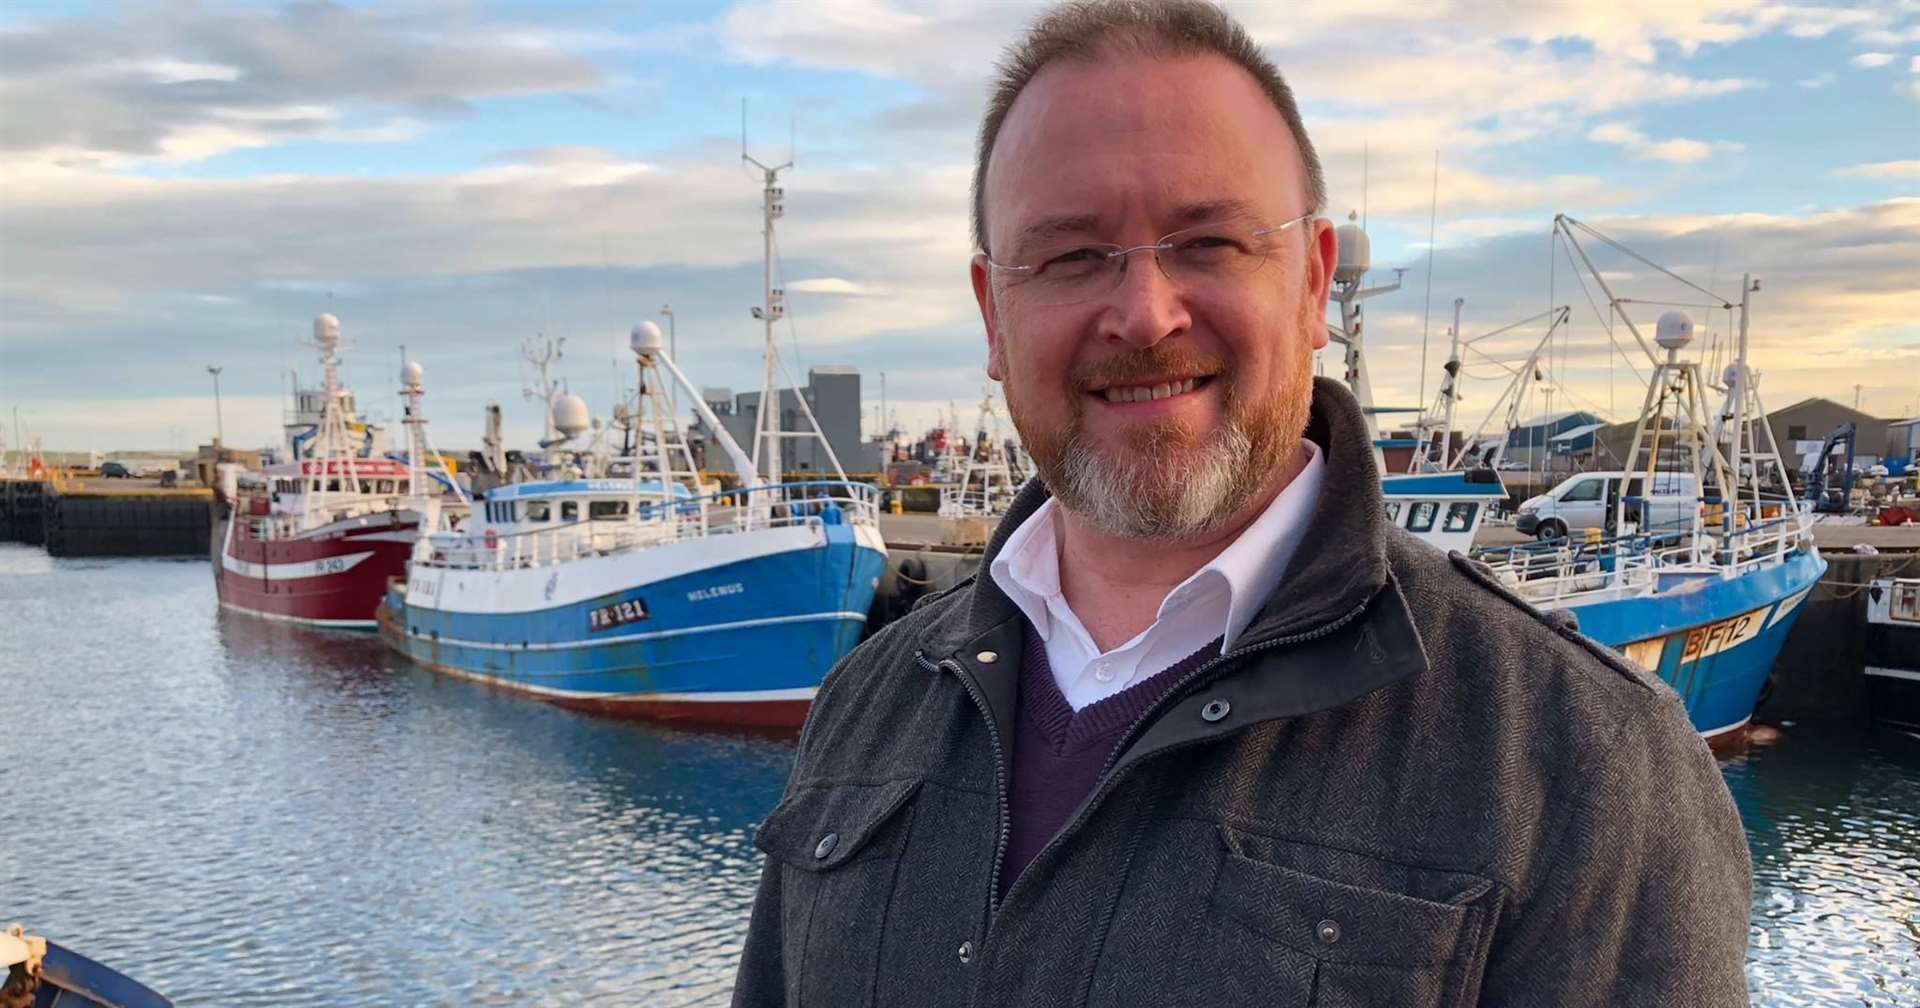 Fishing industry jobs being added to Shortage Occupation List is